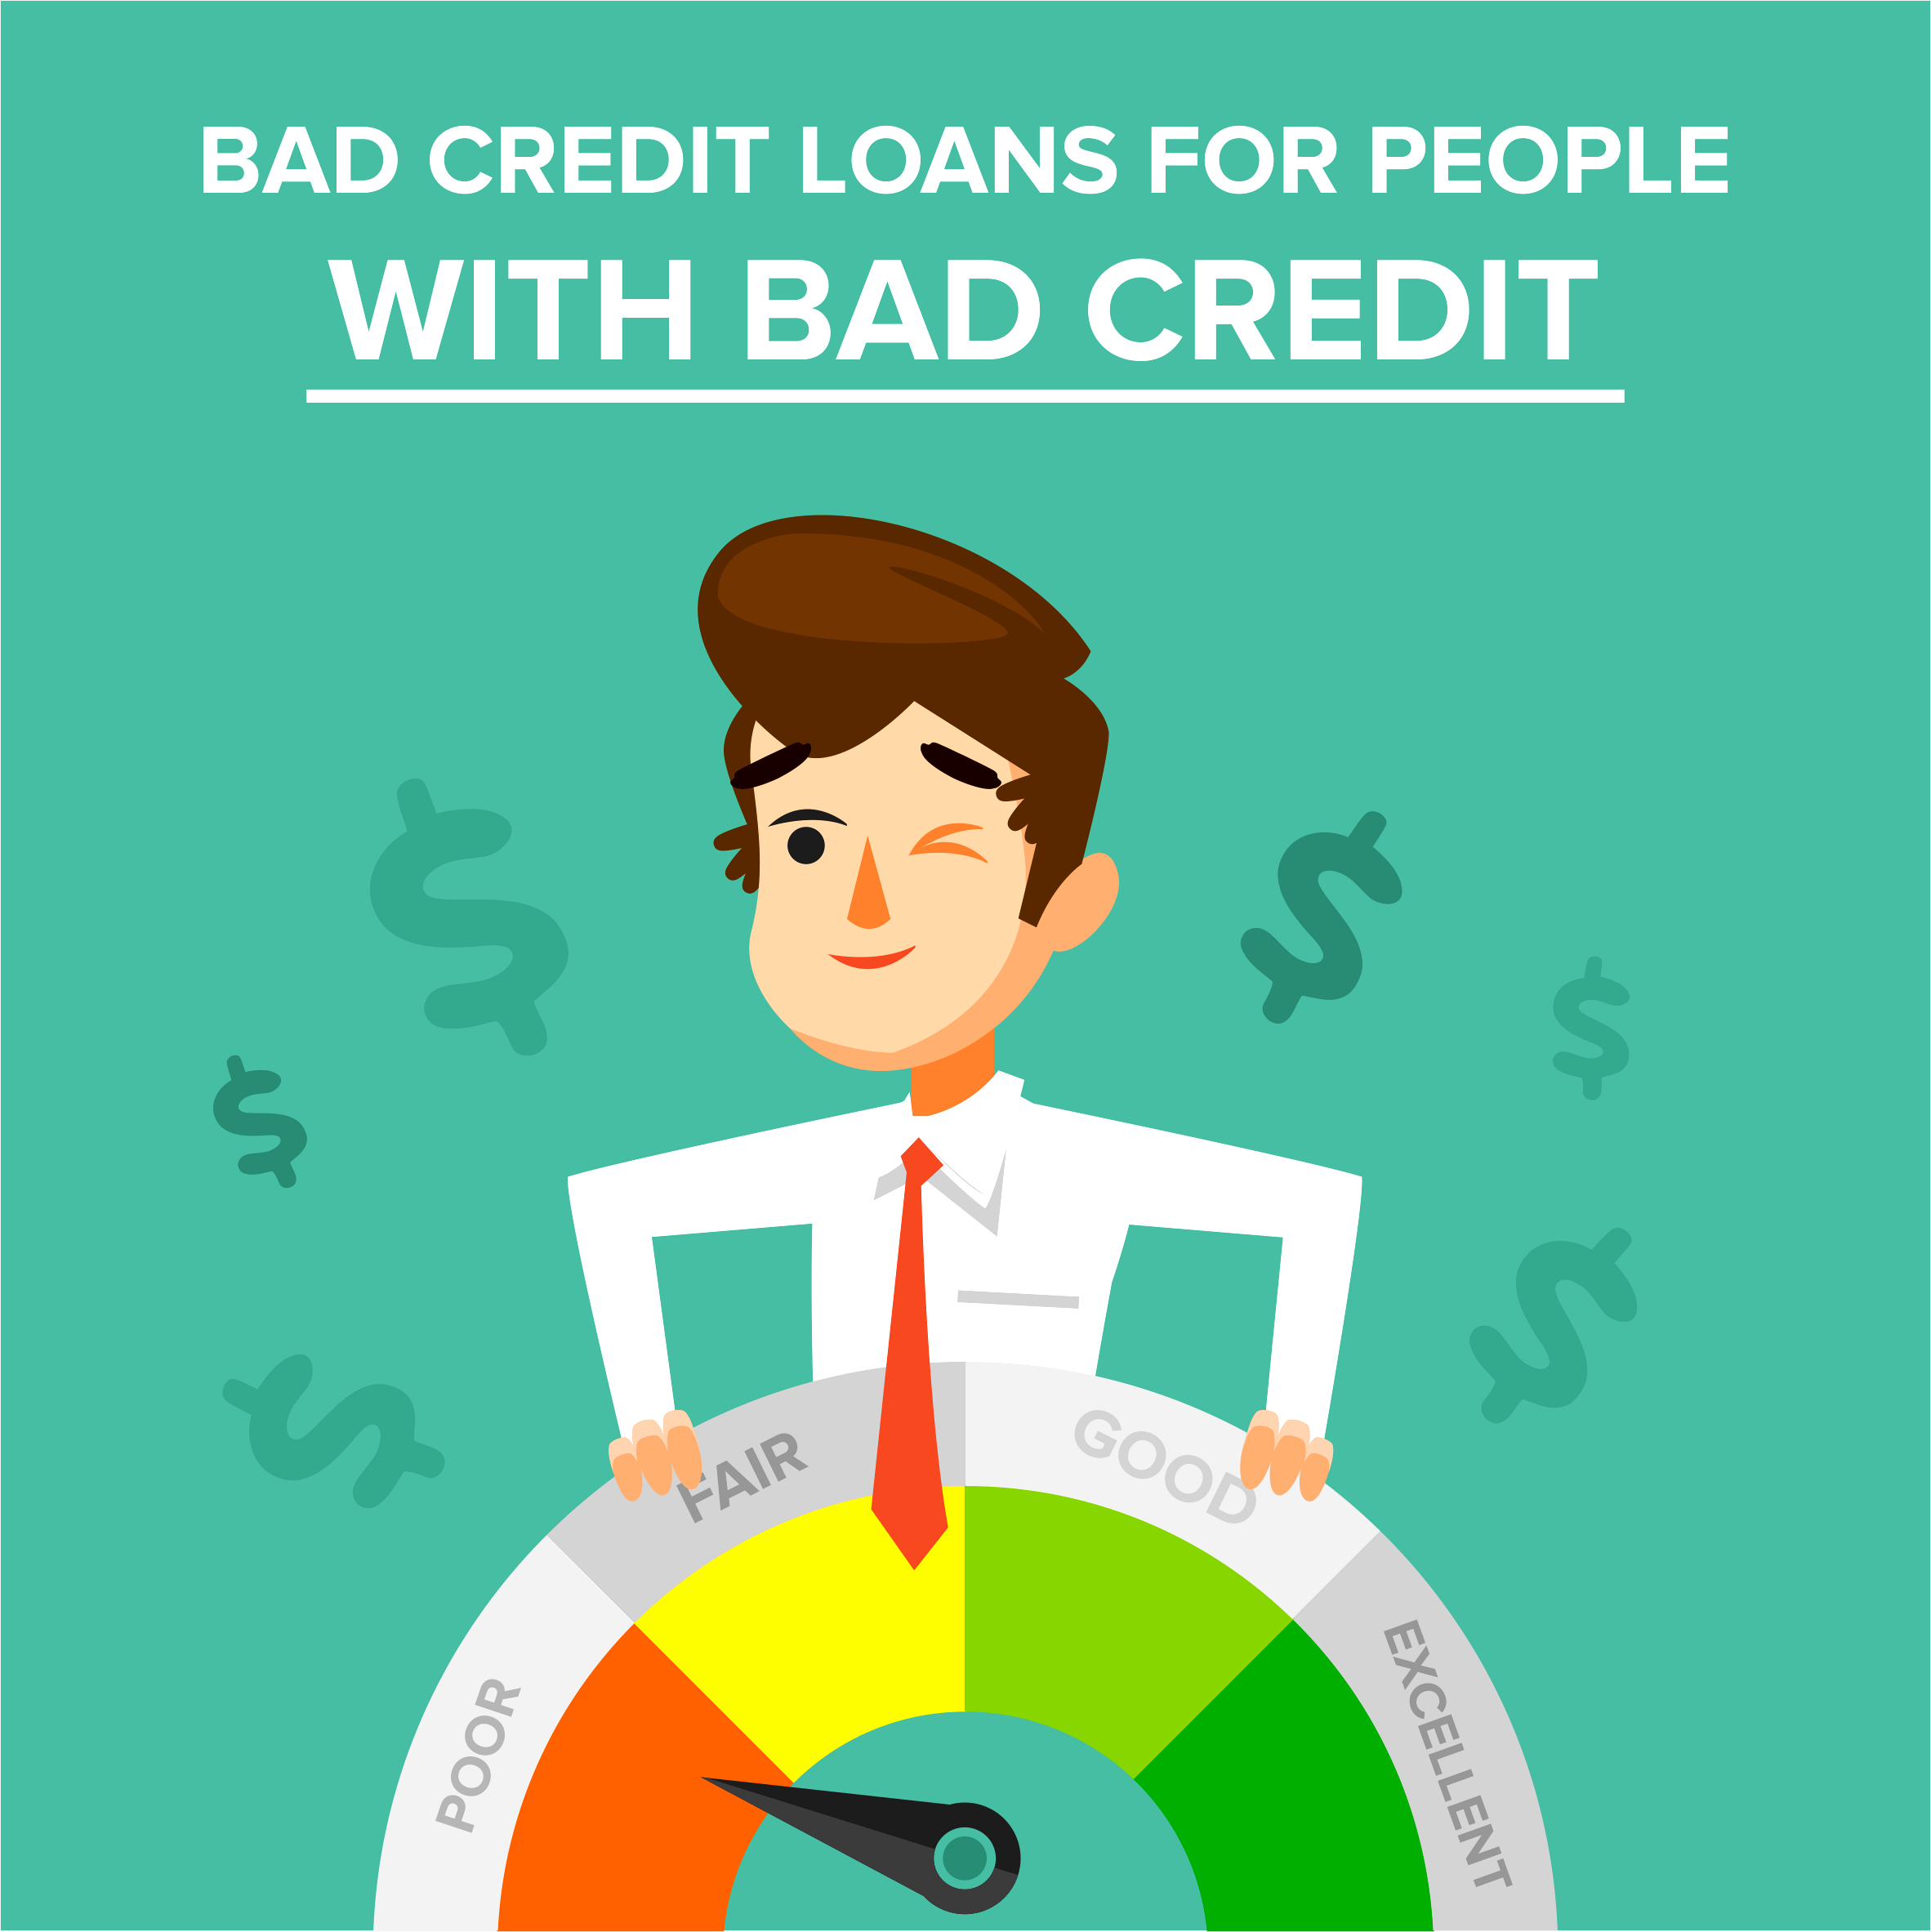 Loans without bank account and bad credit